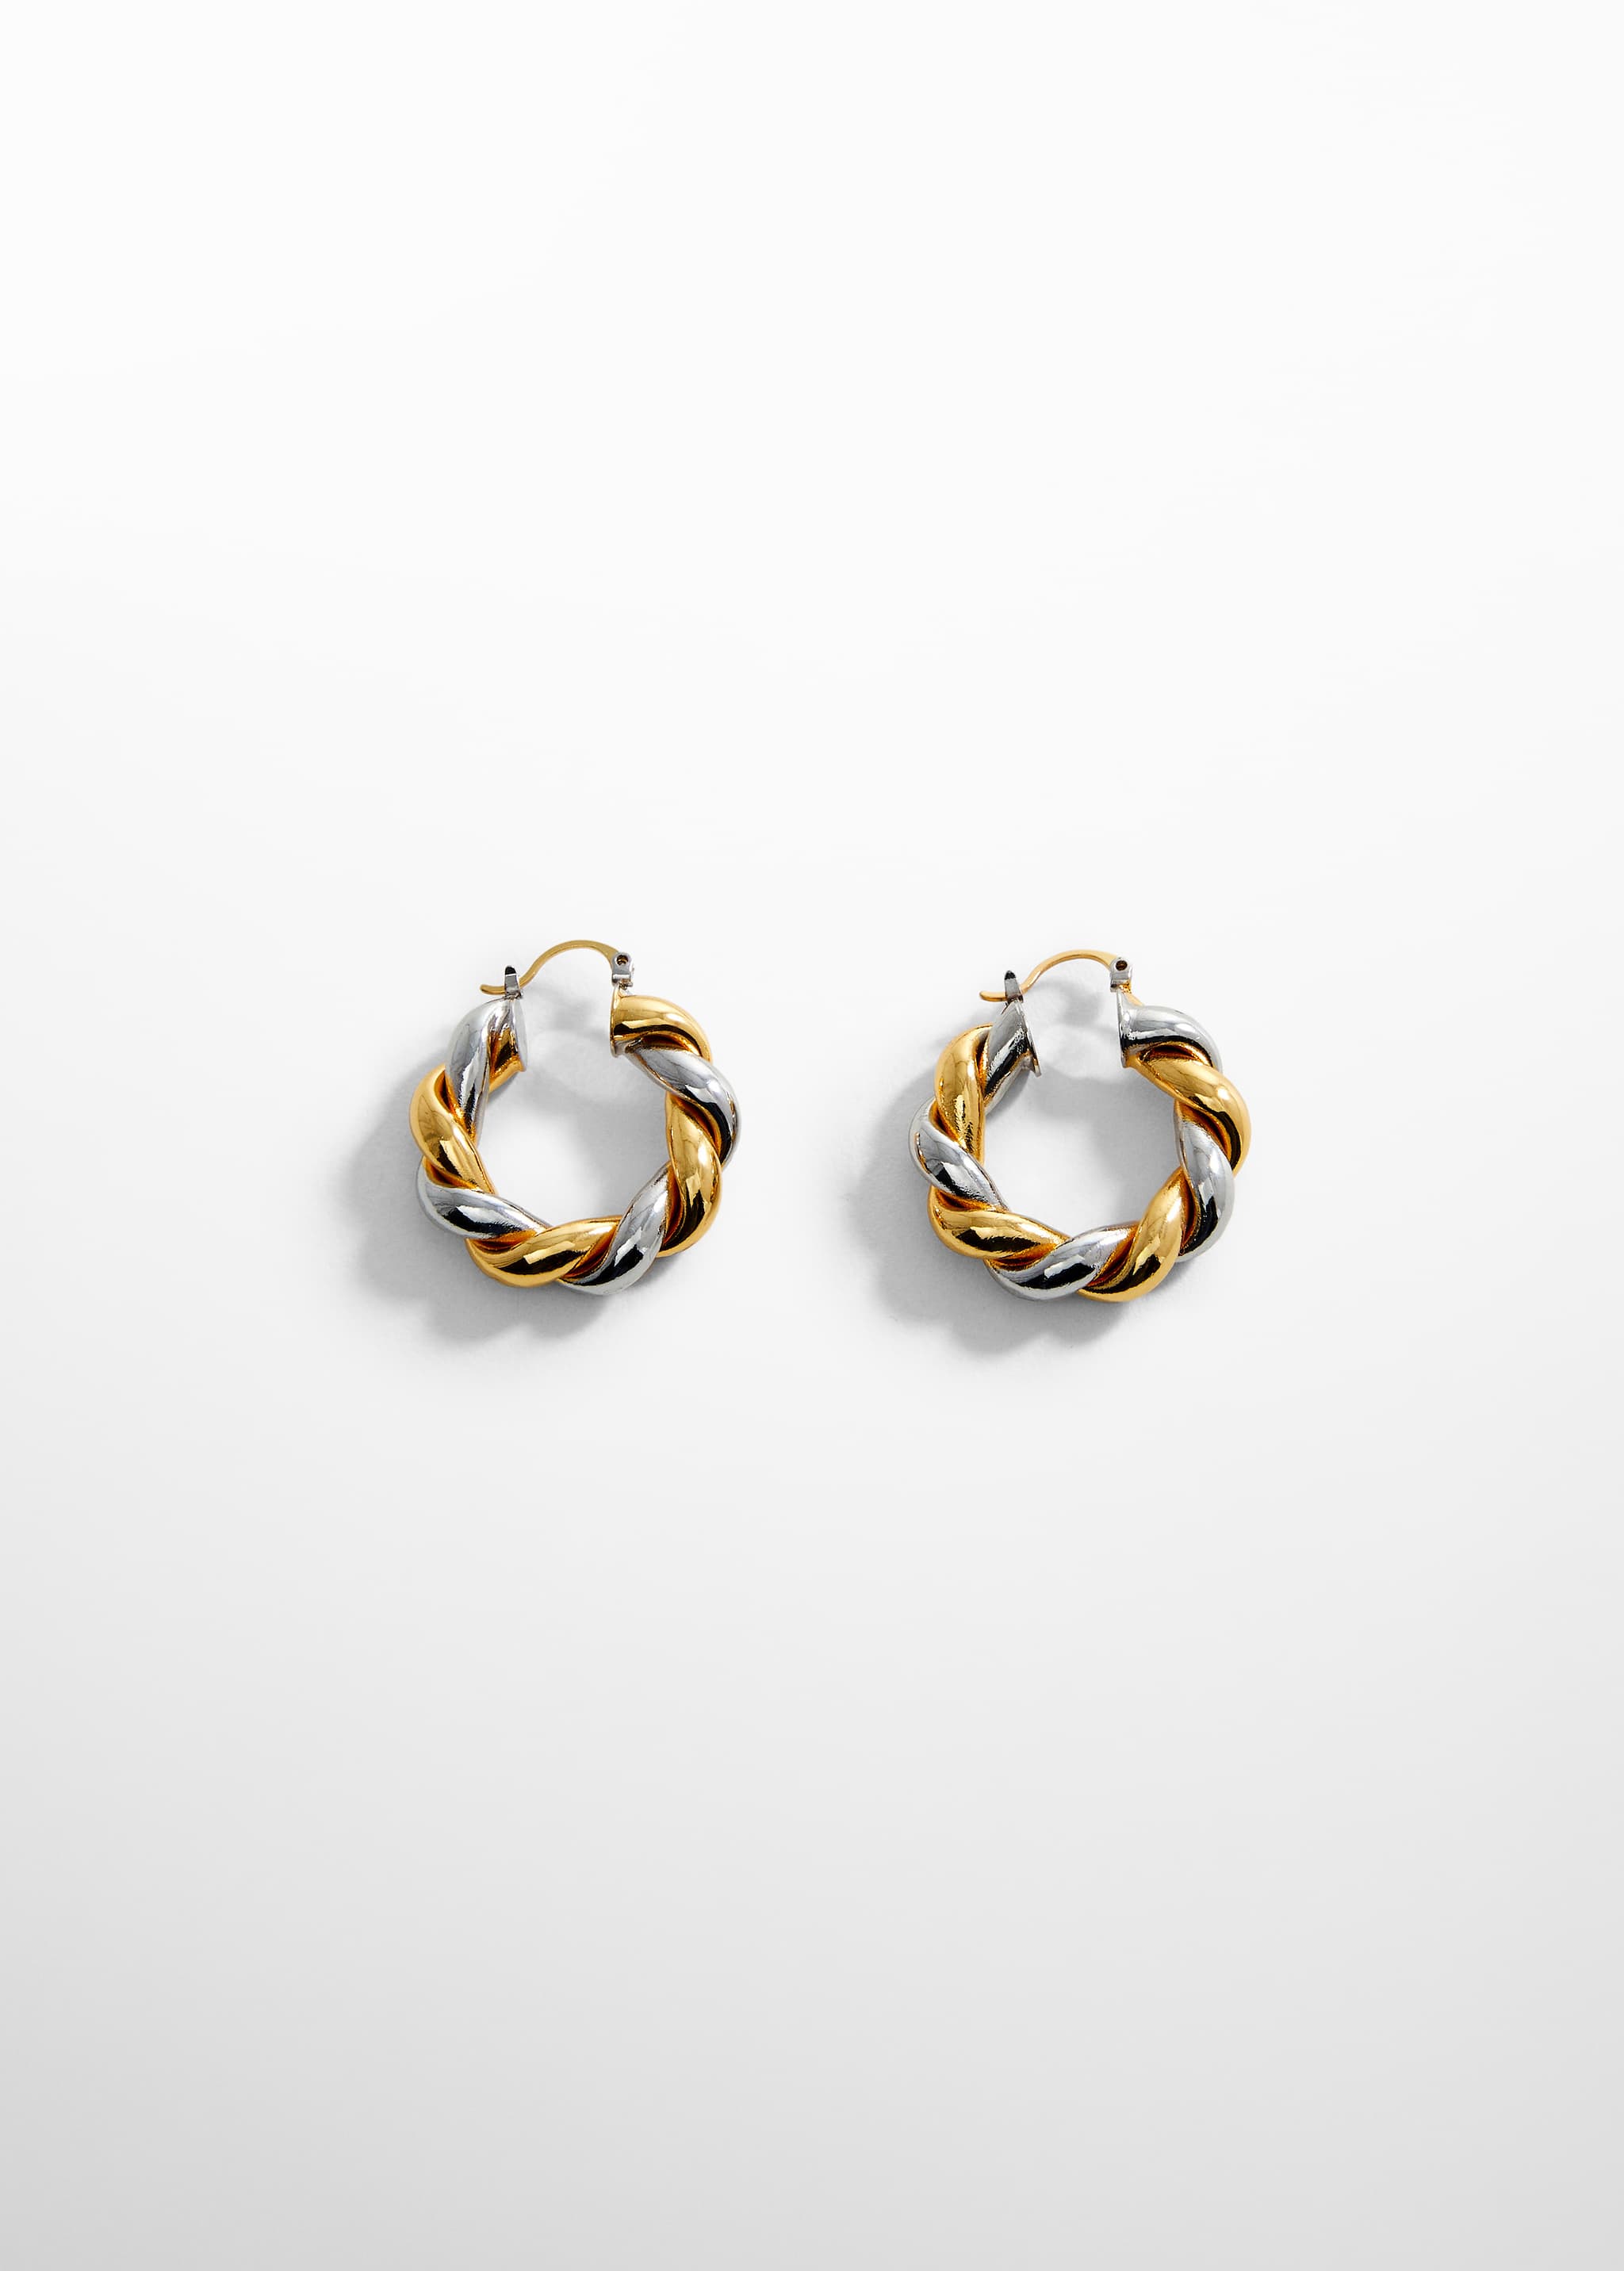 Intertwined hoop earrings - Article without model